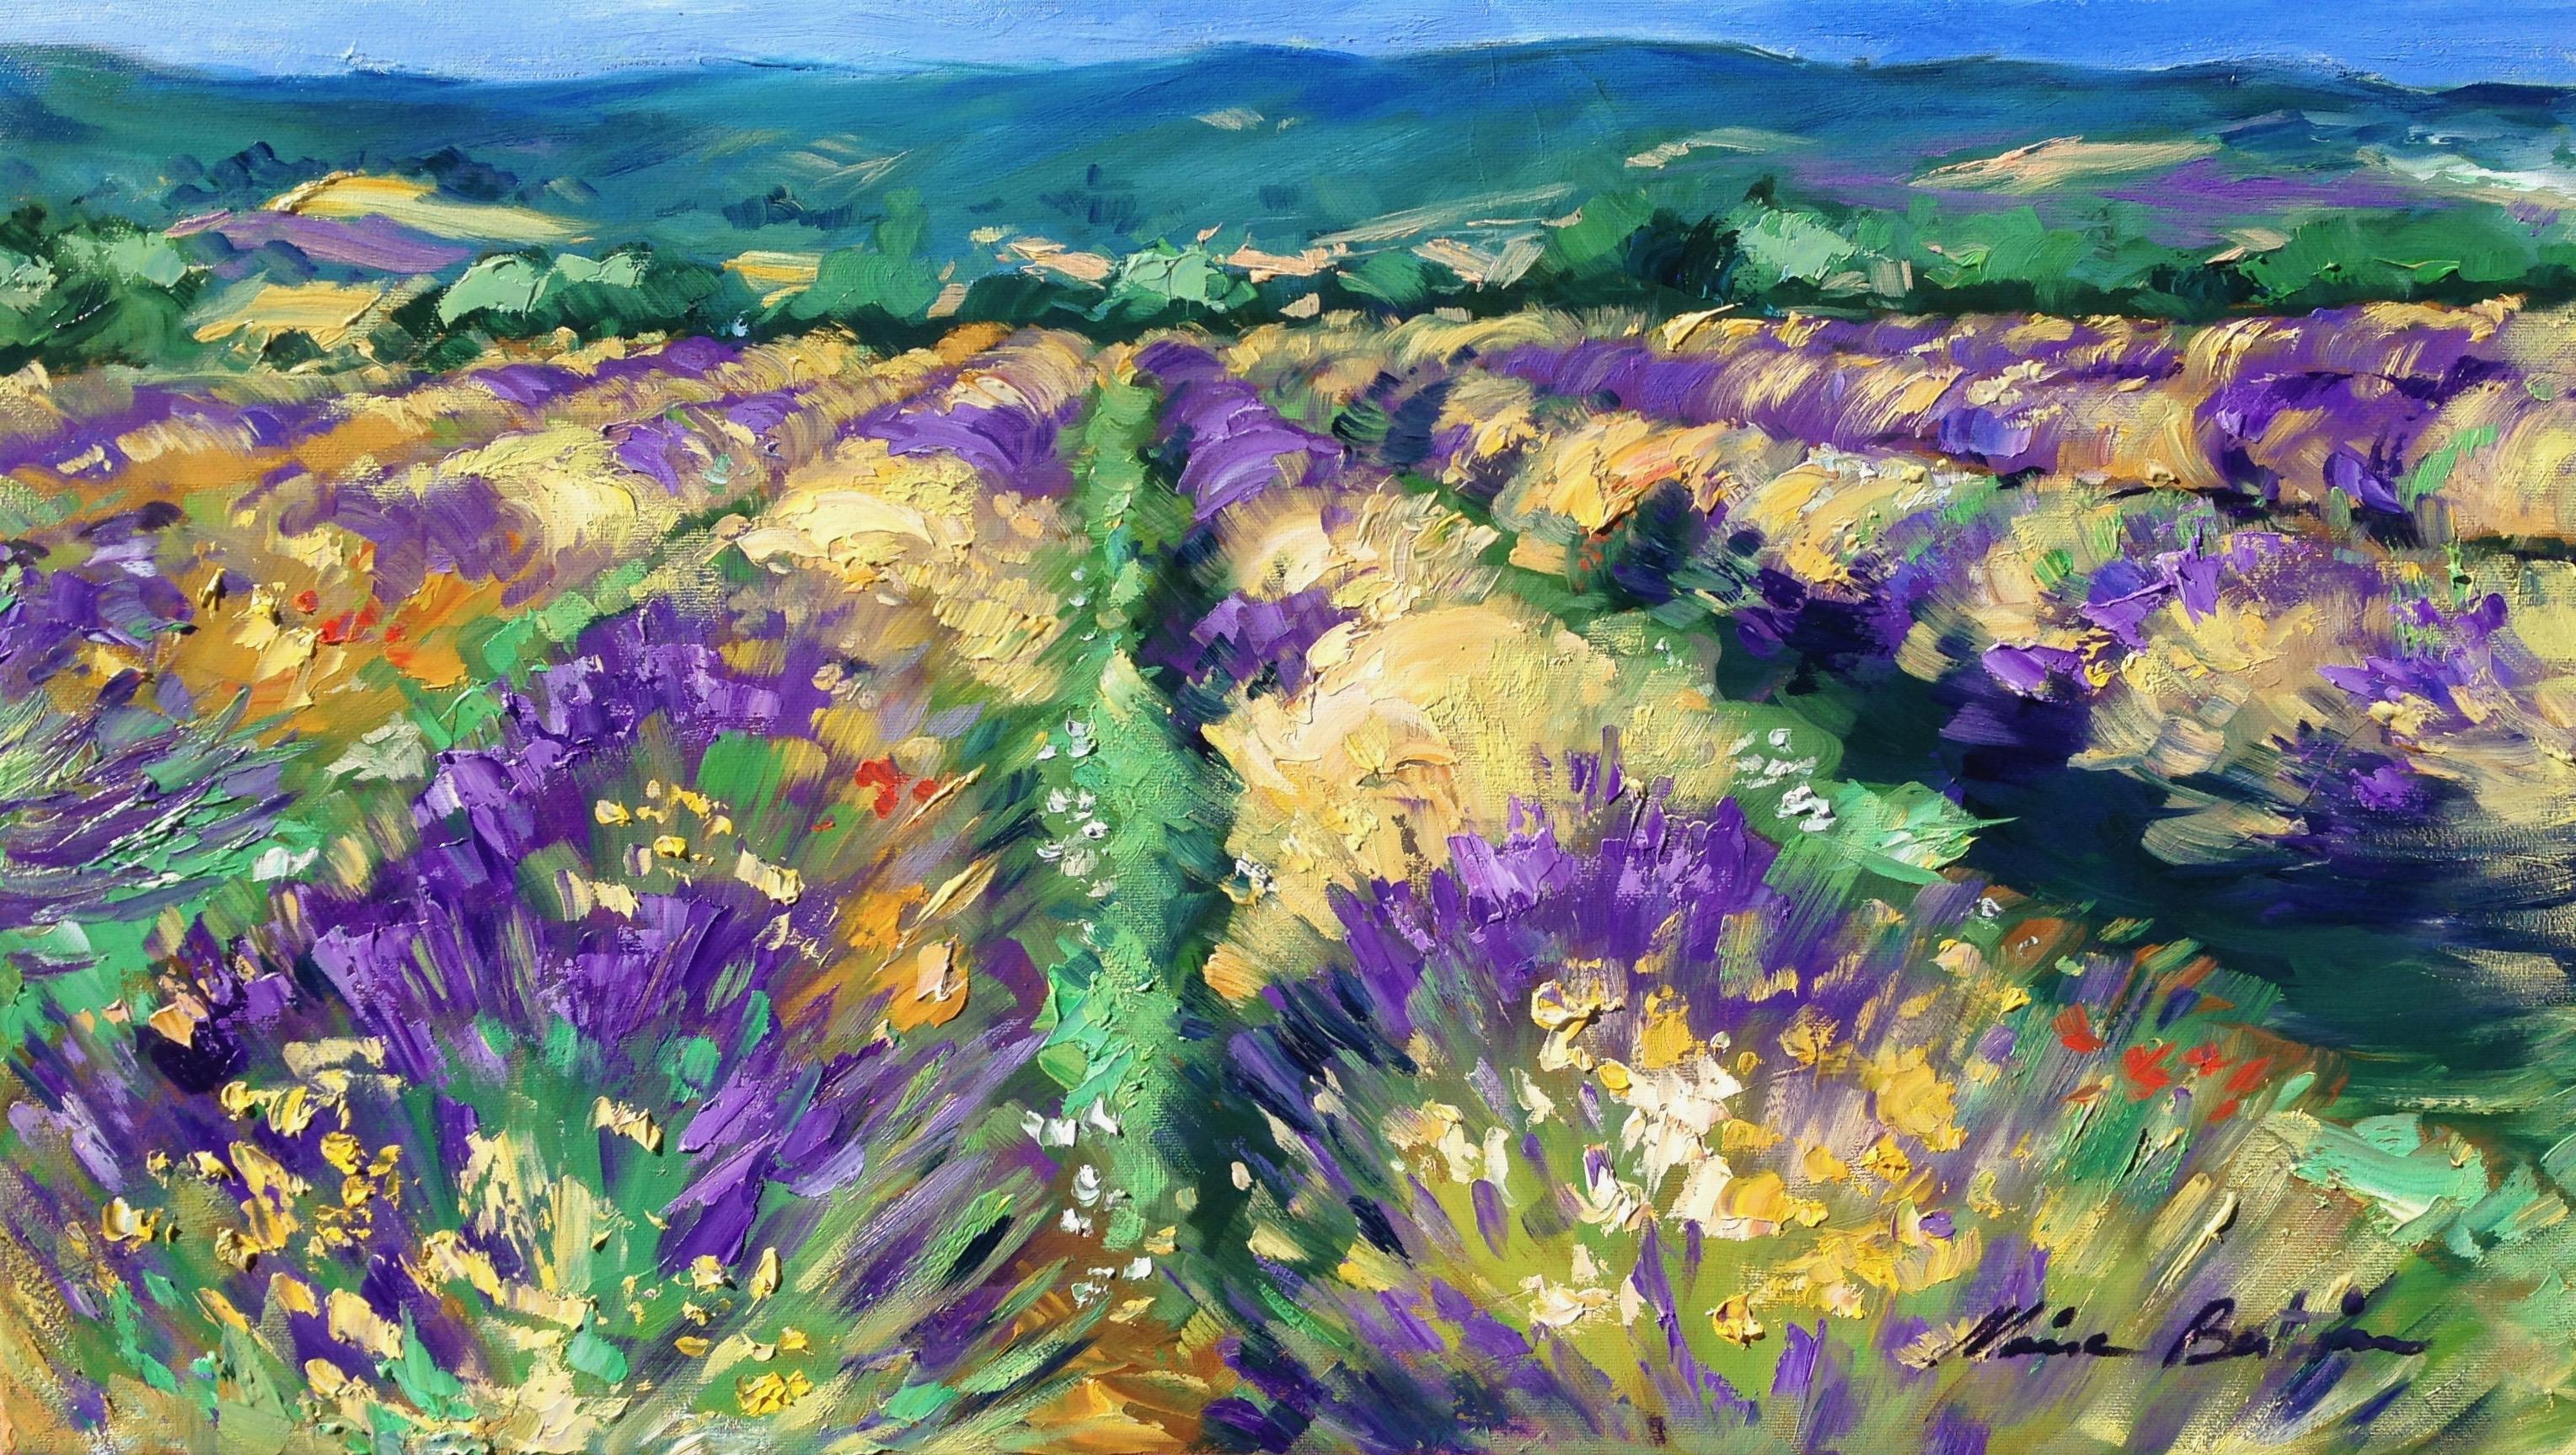 Maria Bertrán Landscape Painting - "High Plains Lavender" Contemporary Impressionist Oil Painting of Provence